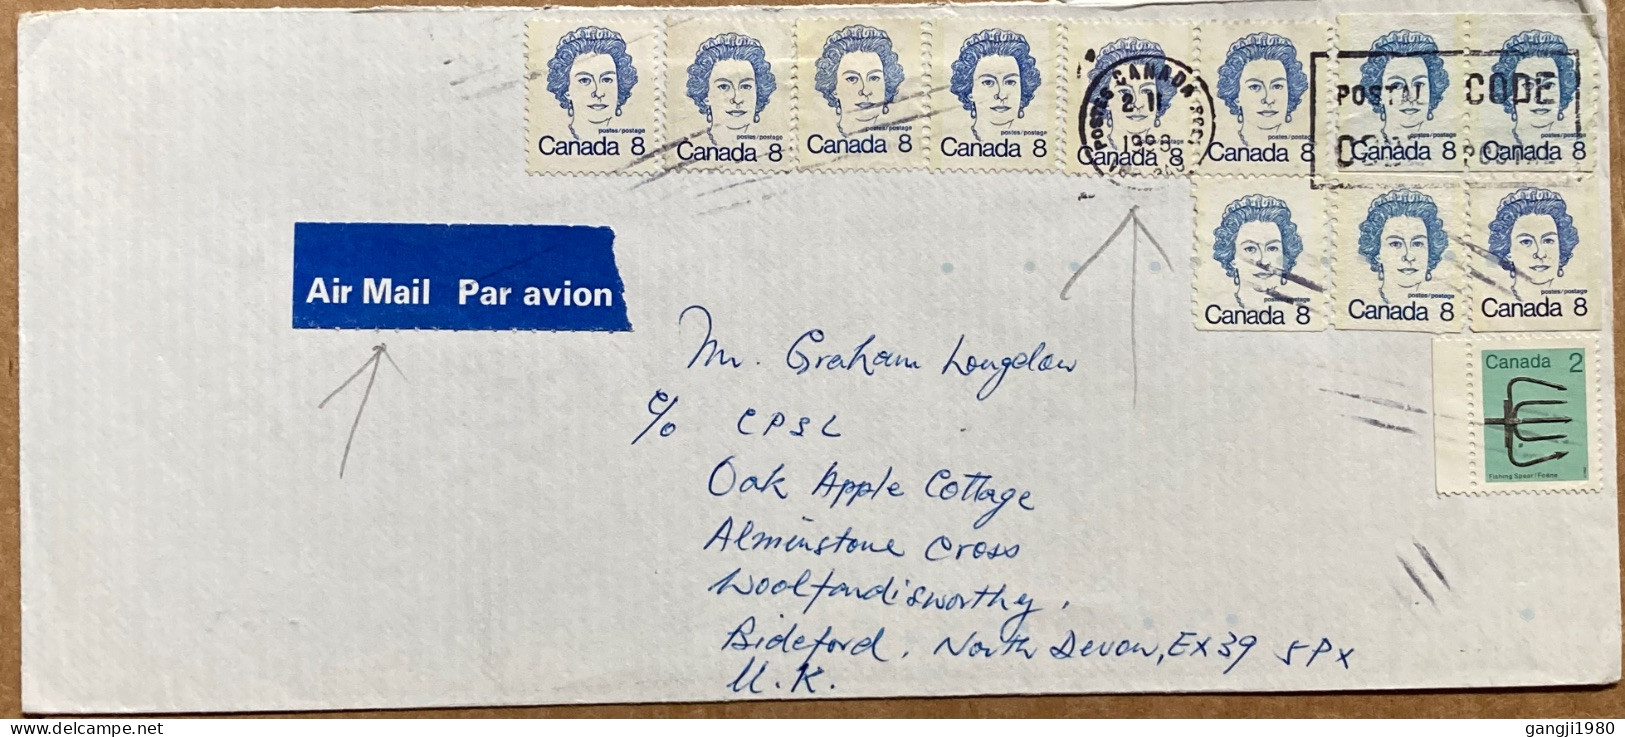 CANADA 1988, COVER USED TO ENGLAND, MULTI 12 STAMP, QUEEN & FISHING SPEAR, POST CODE, MACHINE SLOGAN CANCEL. - Lettres & Documents